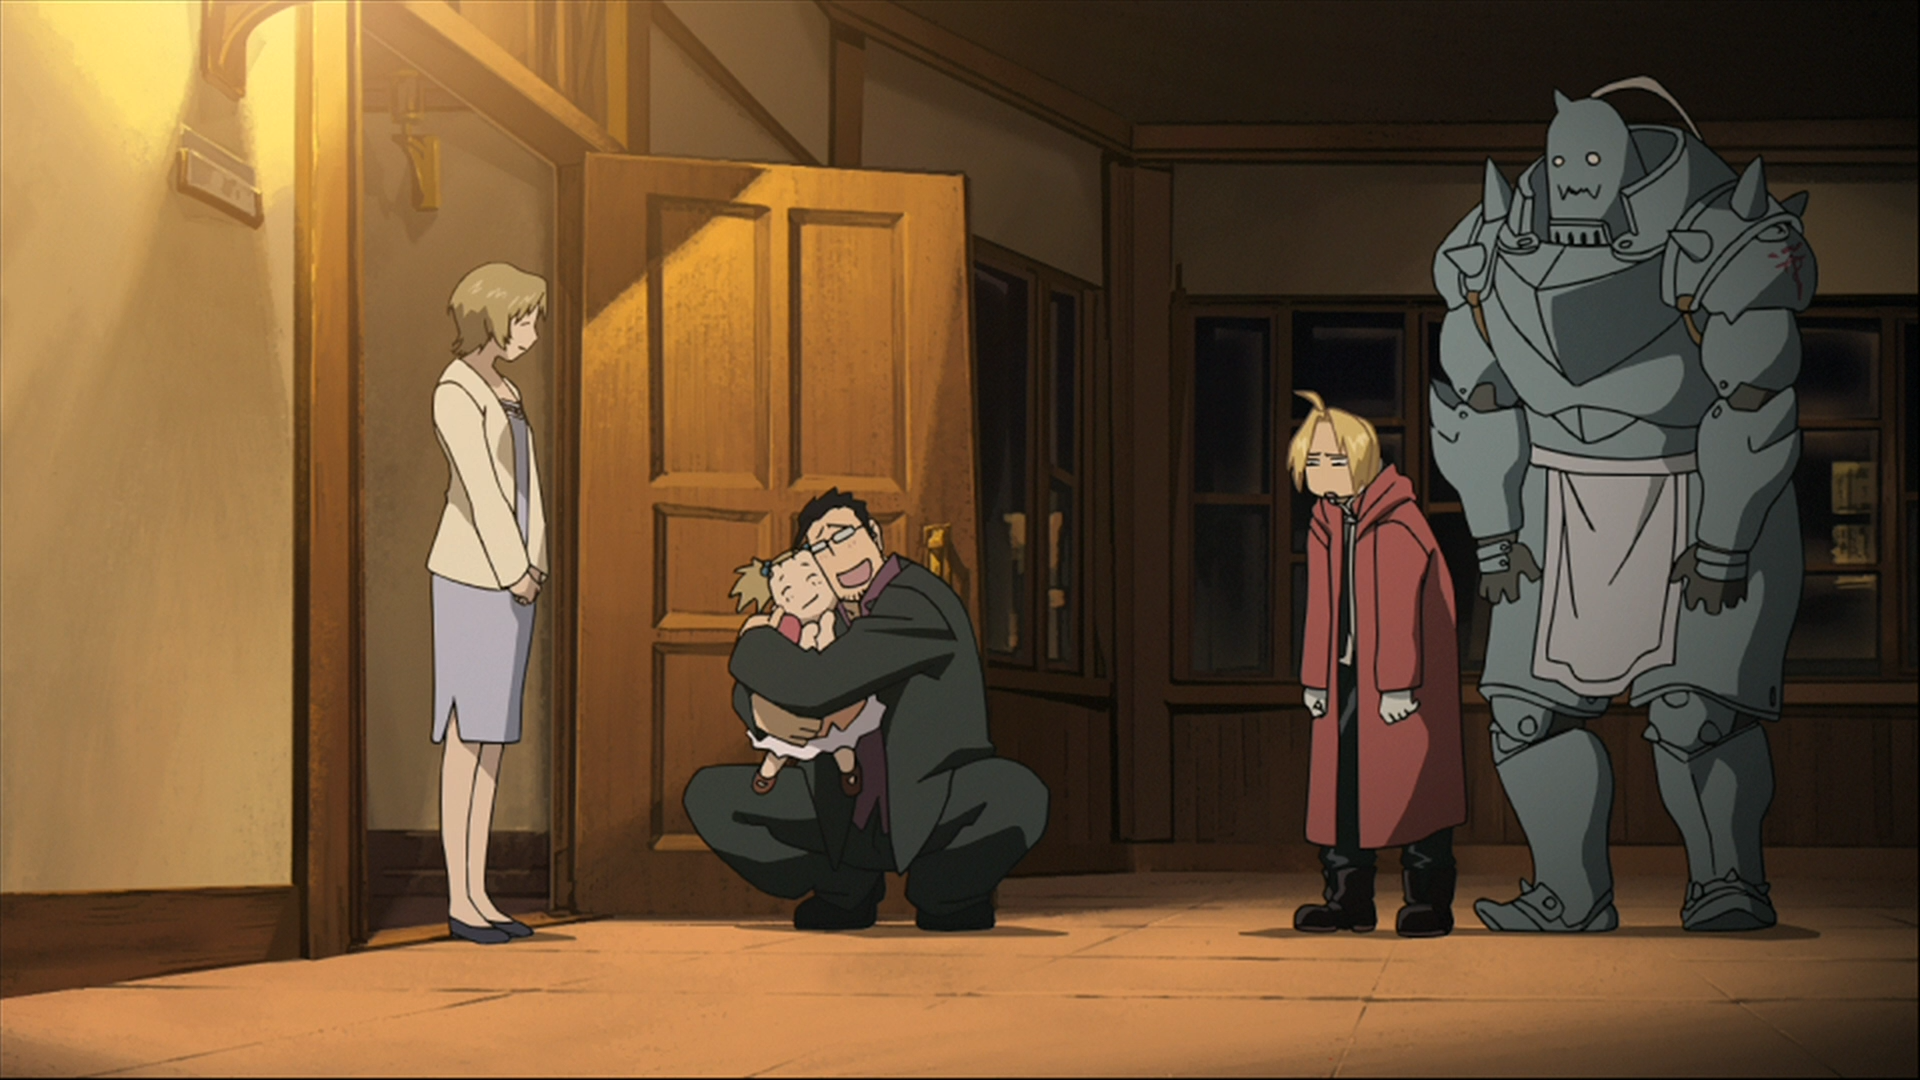 The Differences Between Fullmetal Alchemist and FMA: Brotherhood